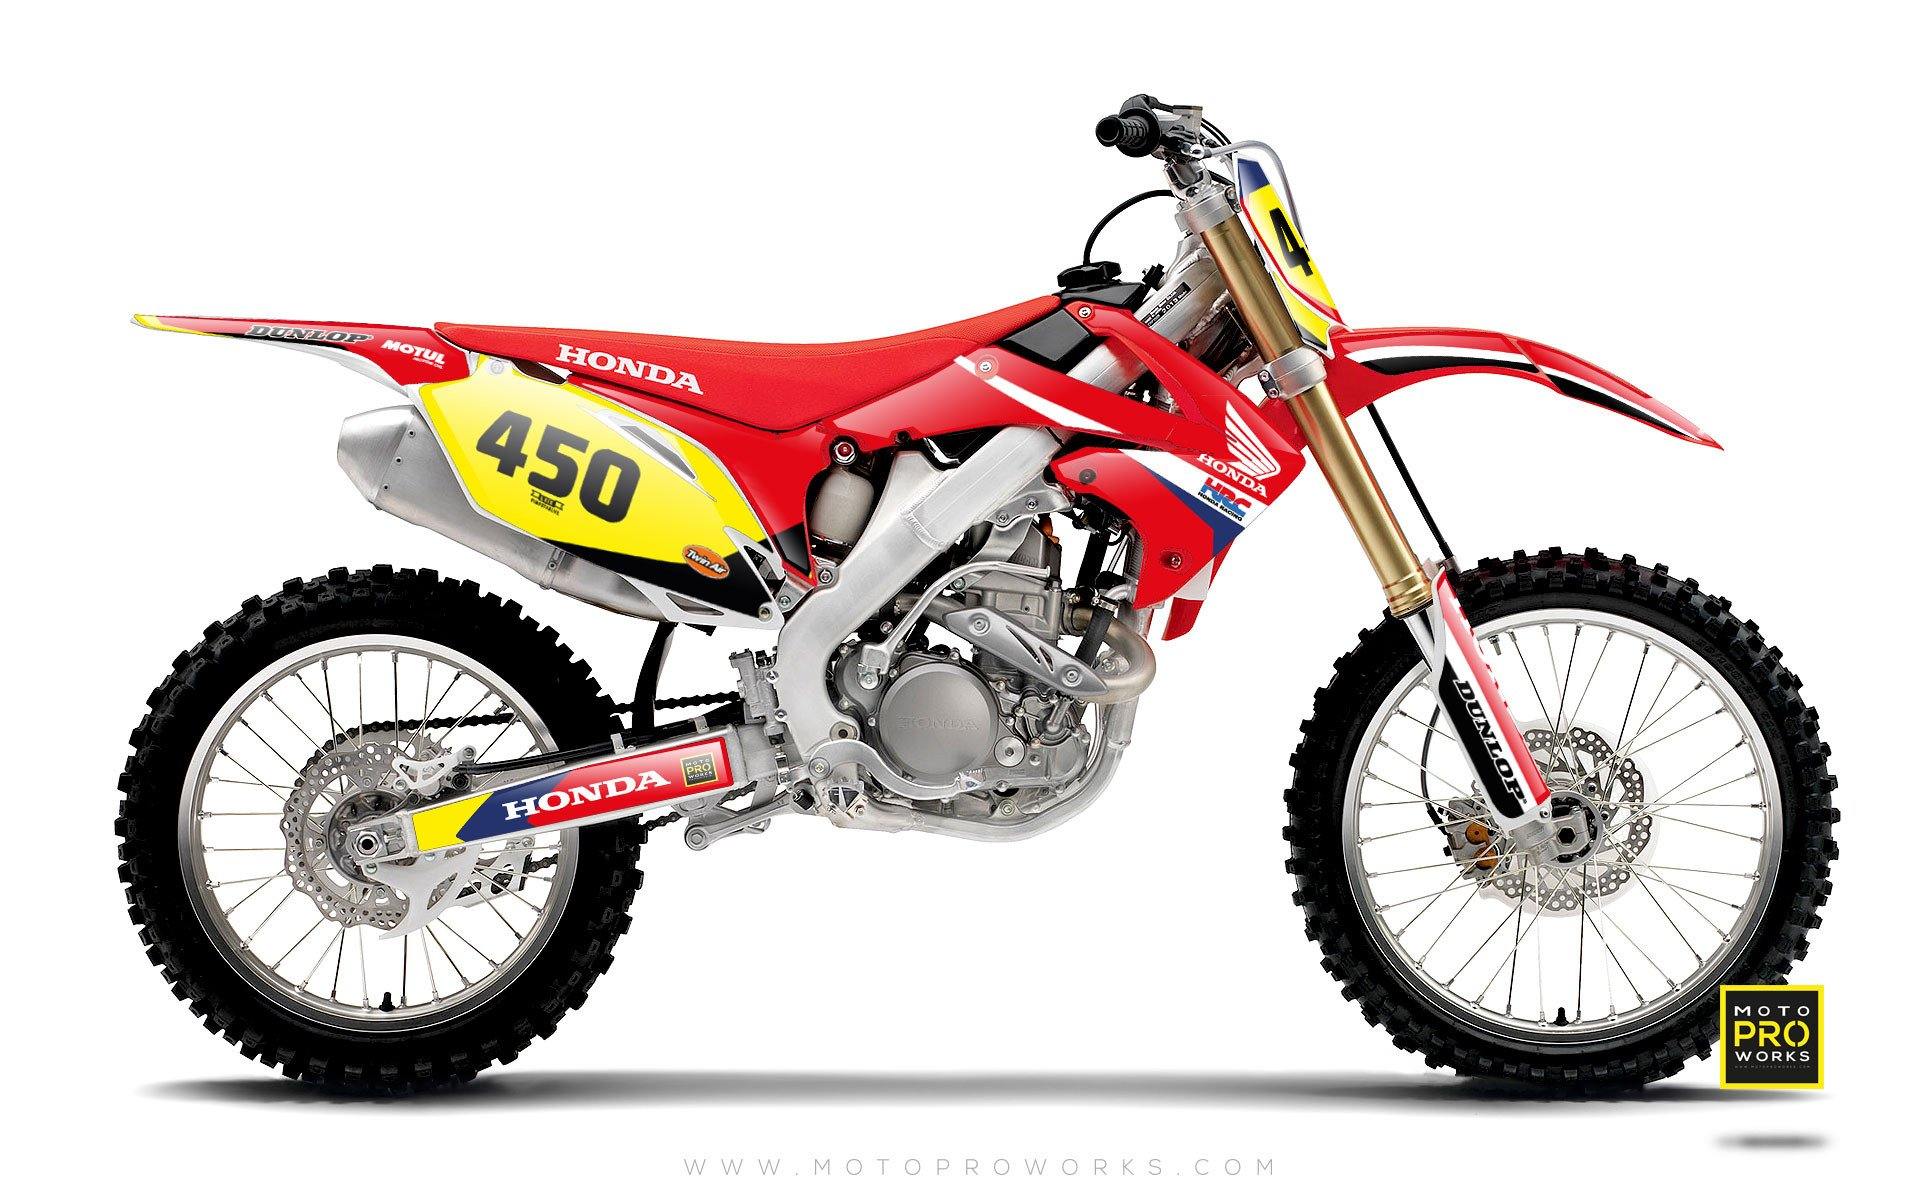 Honda GRAPHIC KIT - "REDRETRO" (red) - MotoProWorks | Decals and Bike Graphic kit